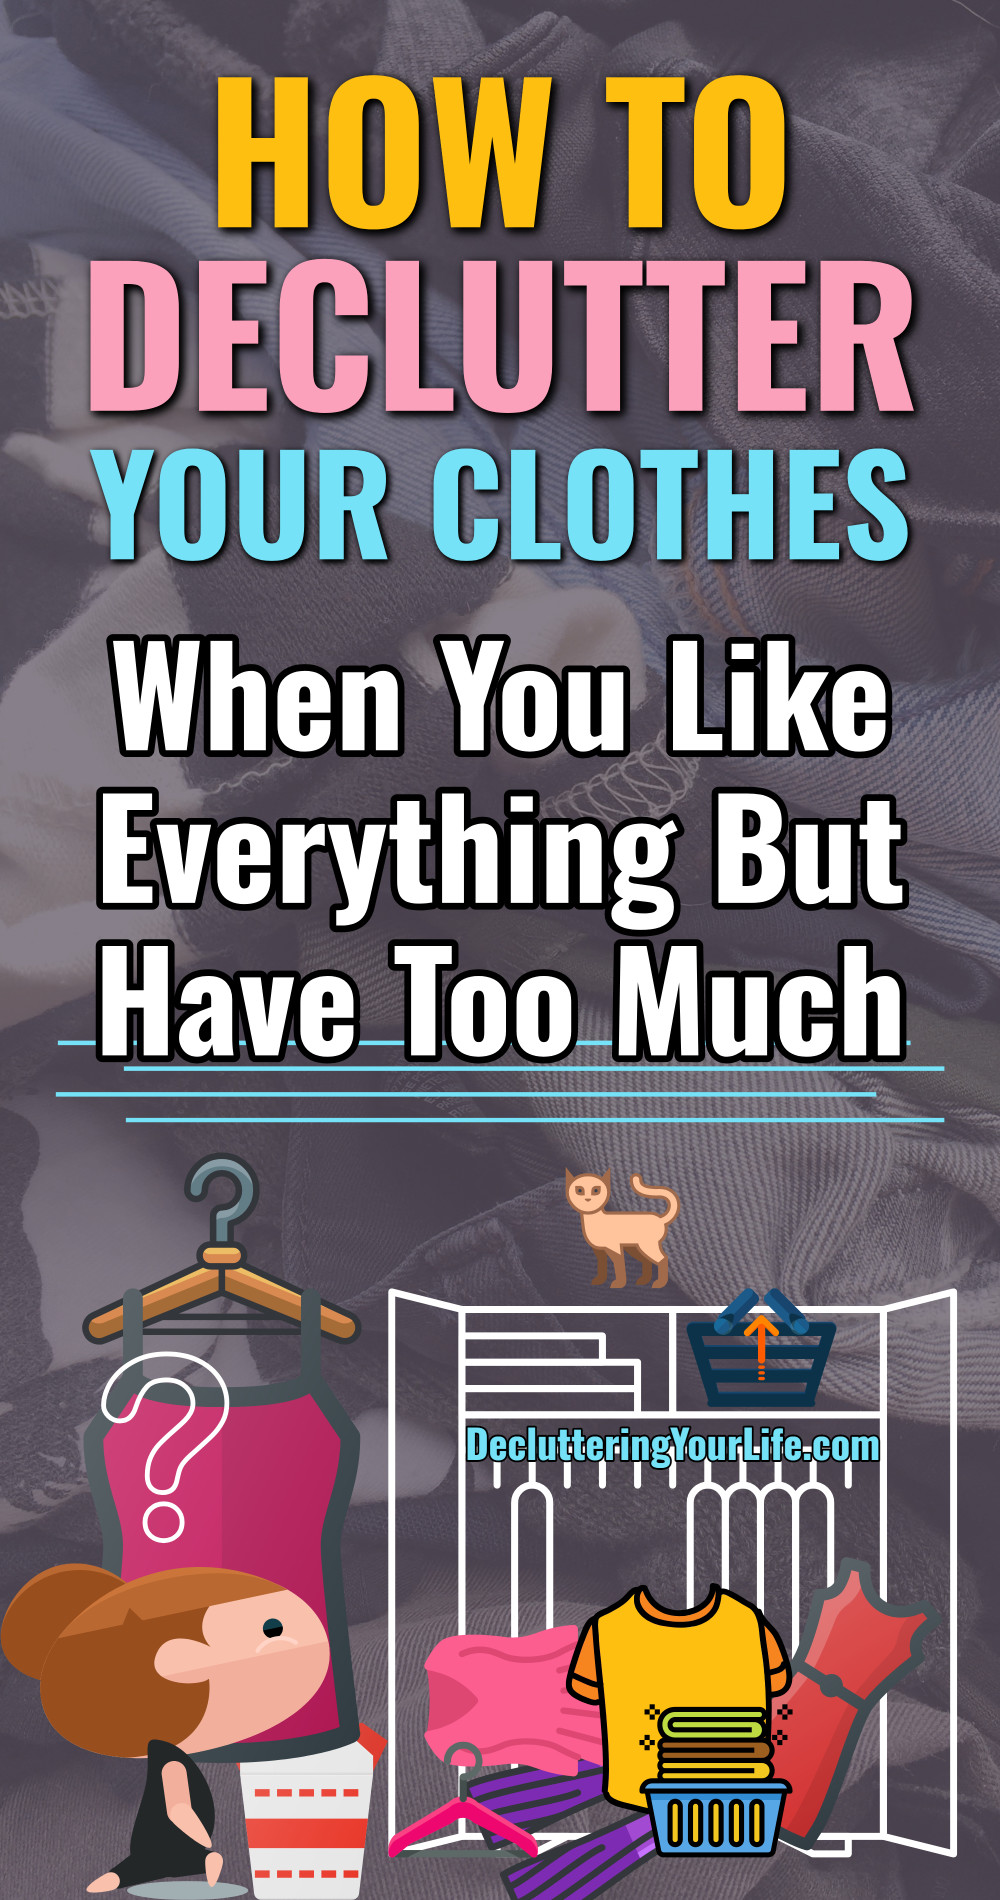 how to declutter your clothes when you like everything but have too much